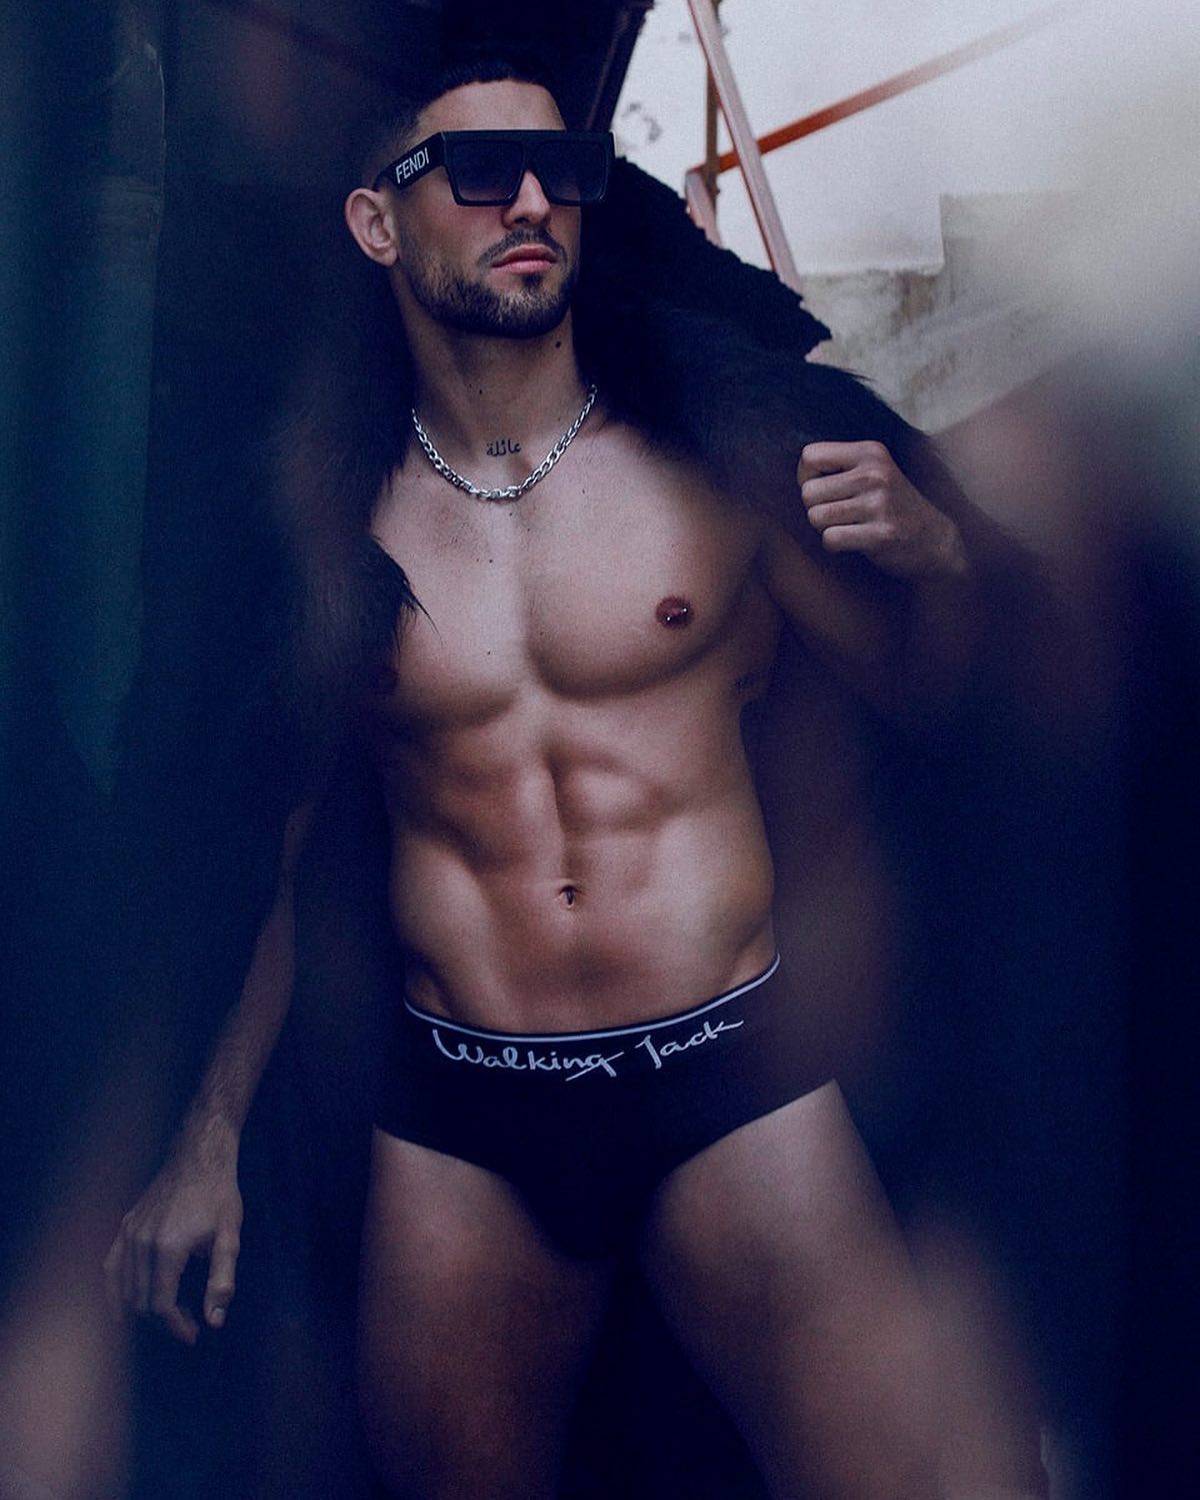 Model Gonzalo is the star of the new editorial by Adrian C. Martin featuring underwear from various brands. Check out the second part:
_____
http://www.menandunderwear.com/2022/01/model-gonzalo-by-adrian-c-martin-underwear-from-various-brands-part-two.html